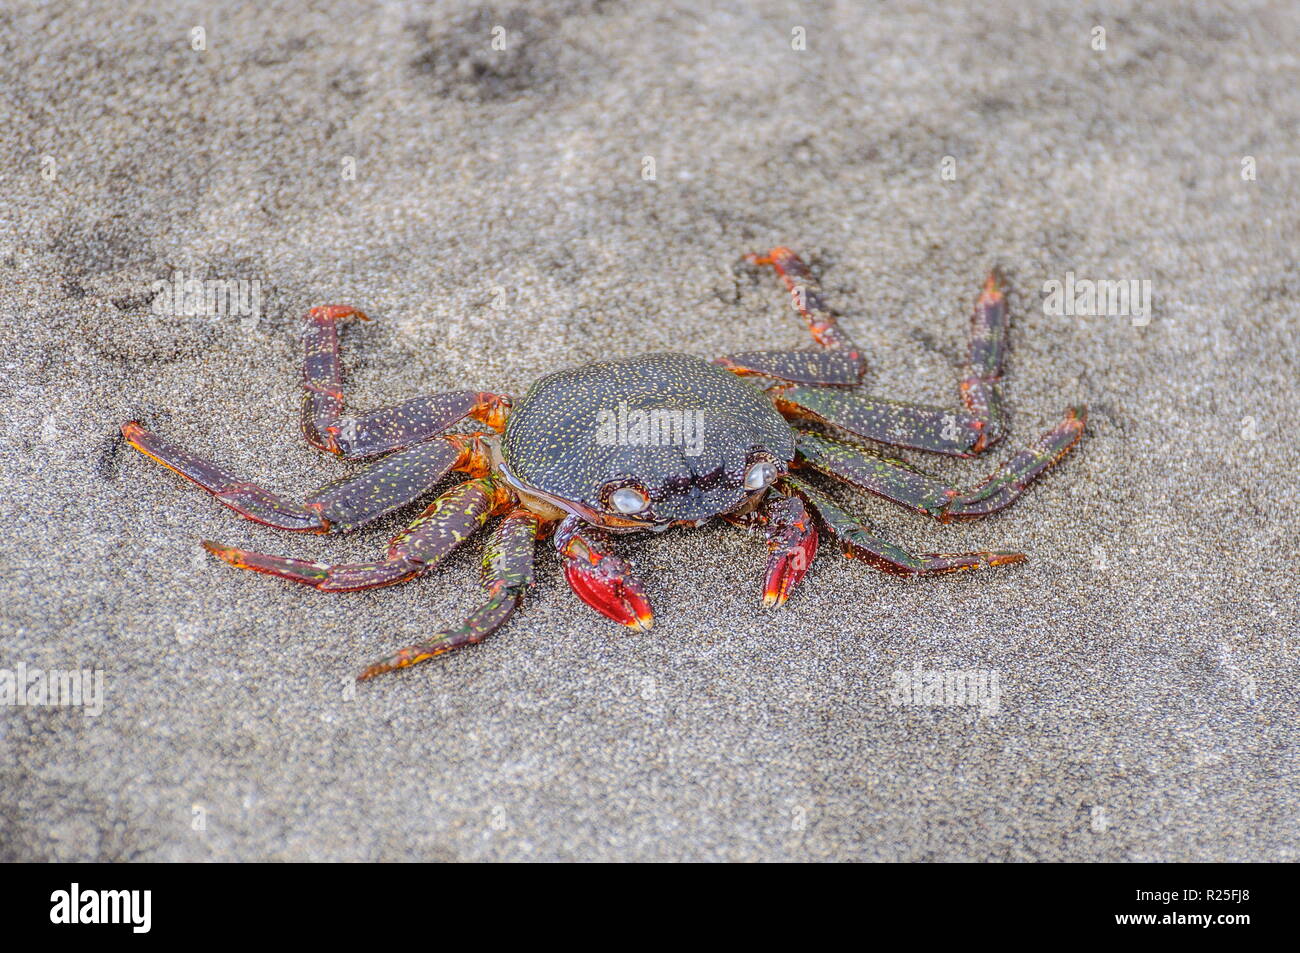 Crab sitting on the sand on the beach Stock Photo